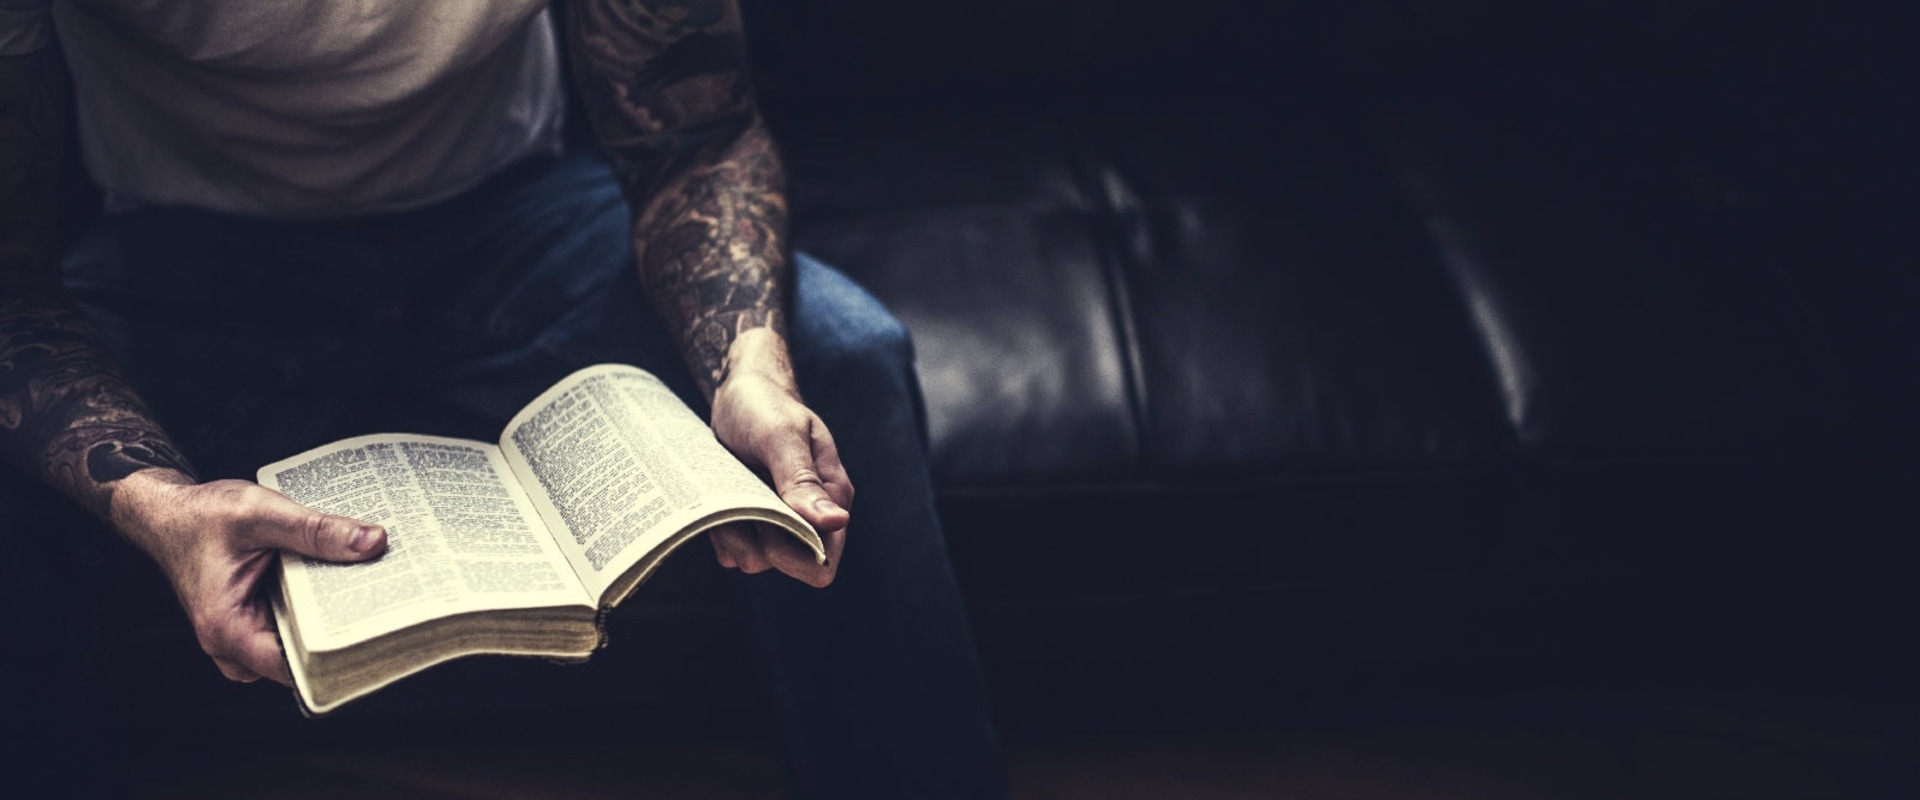 Can god be trusted bible study?